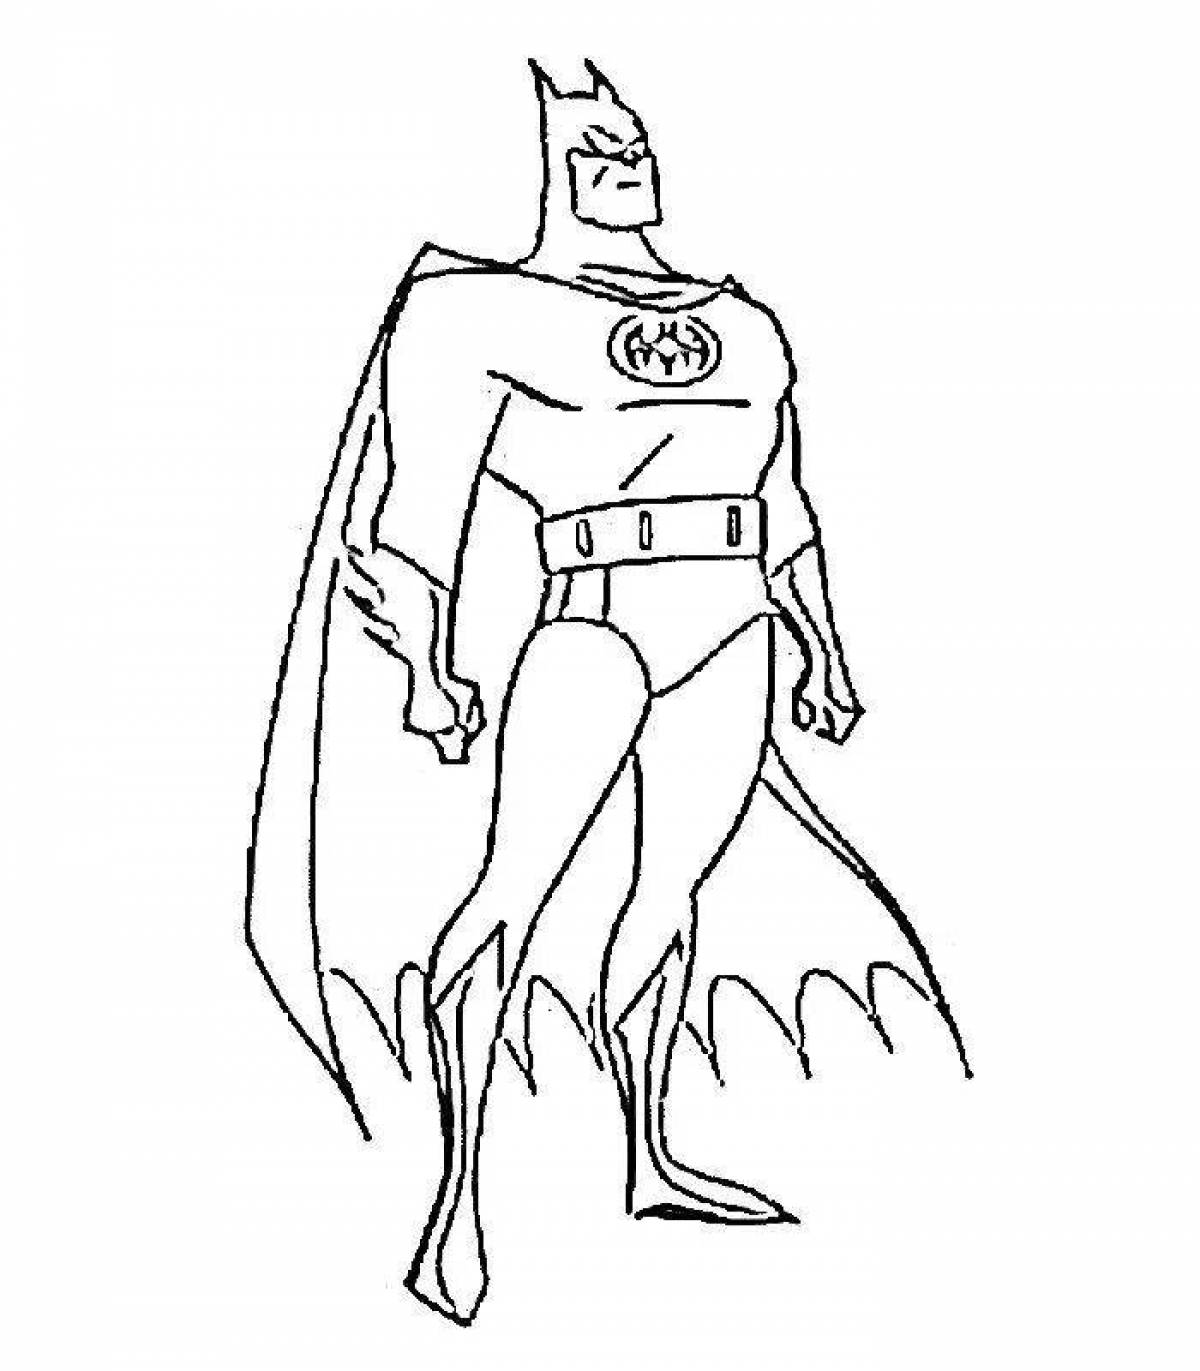 Fearless Batman coloring page